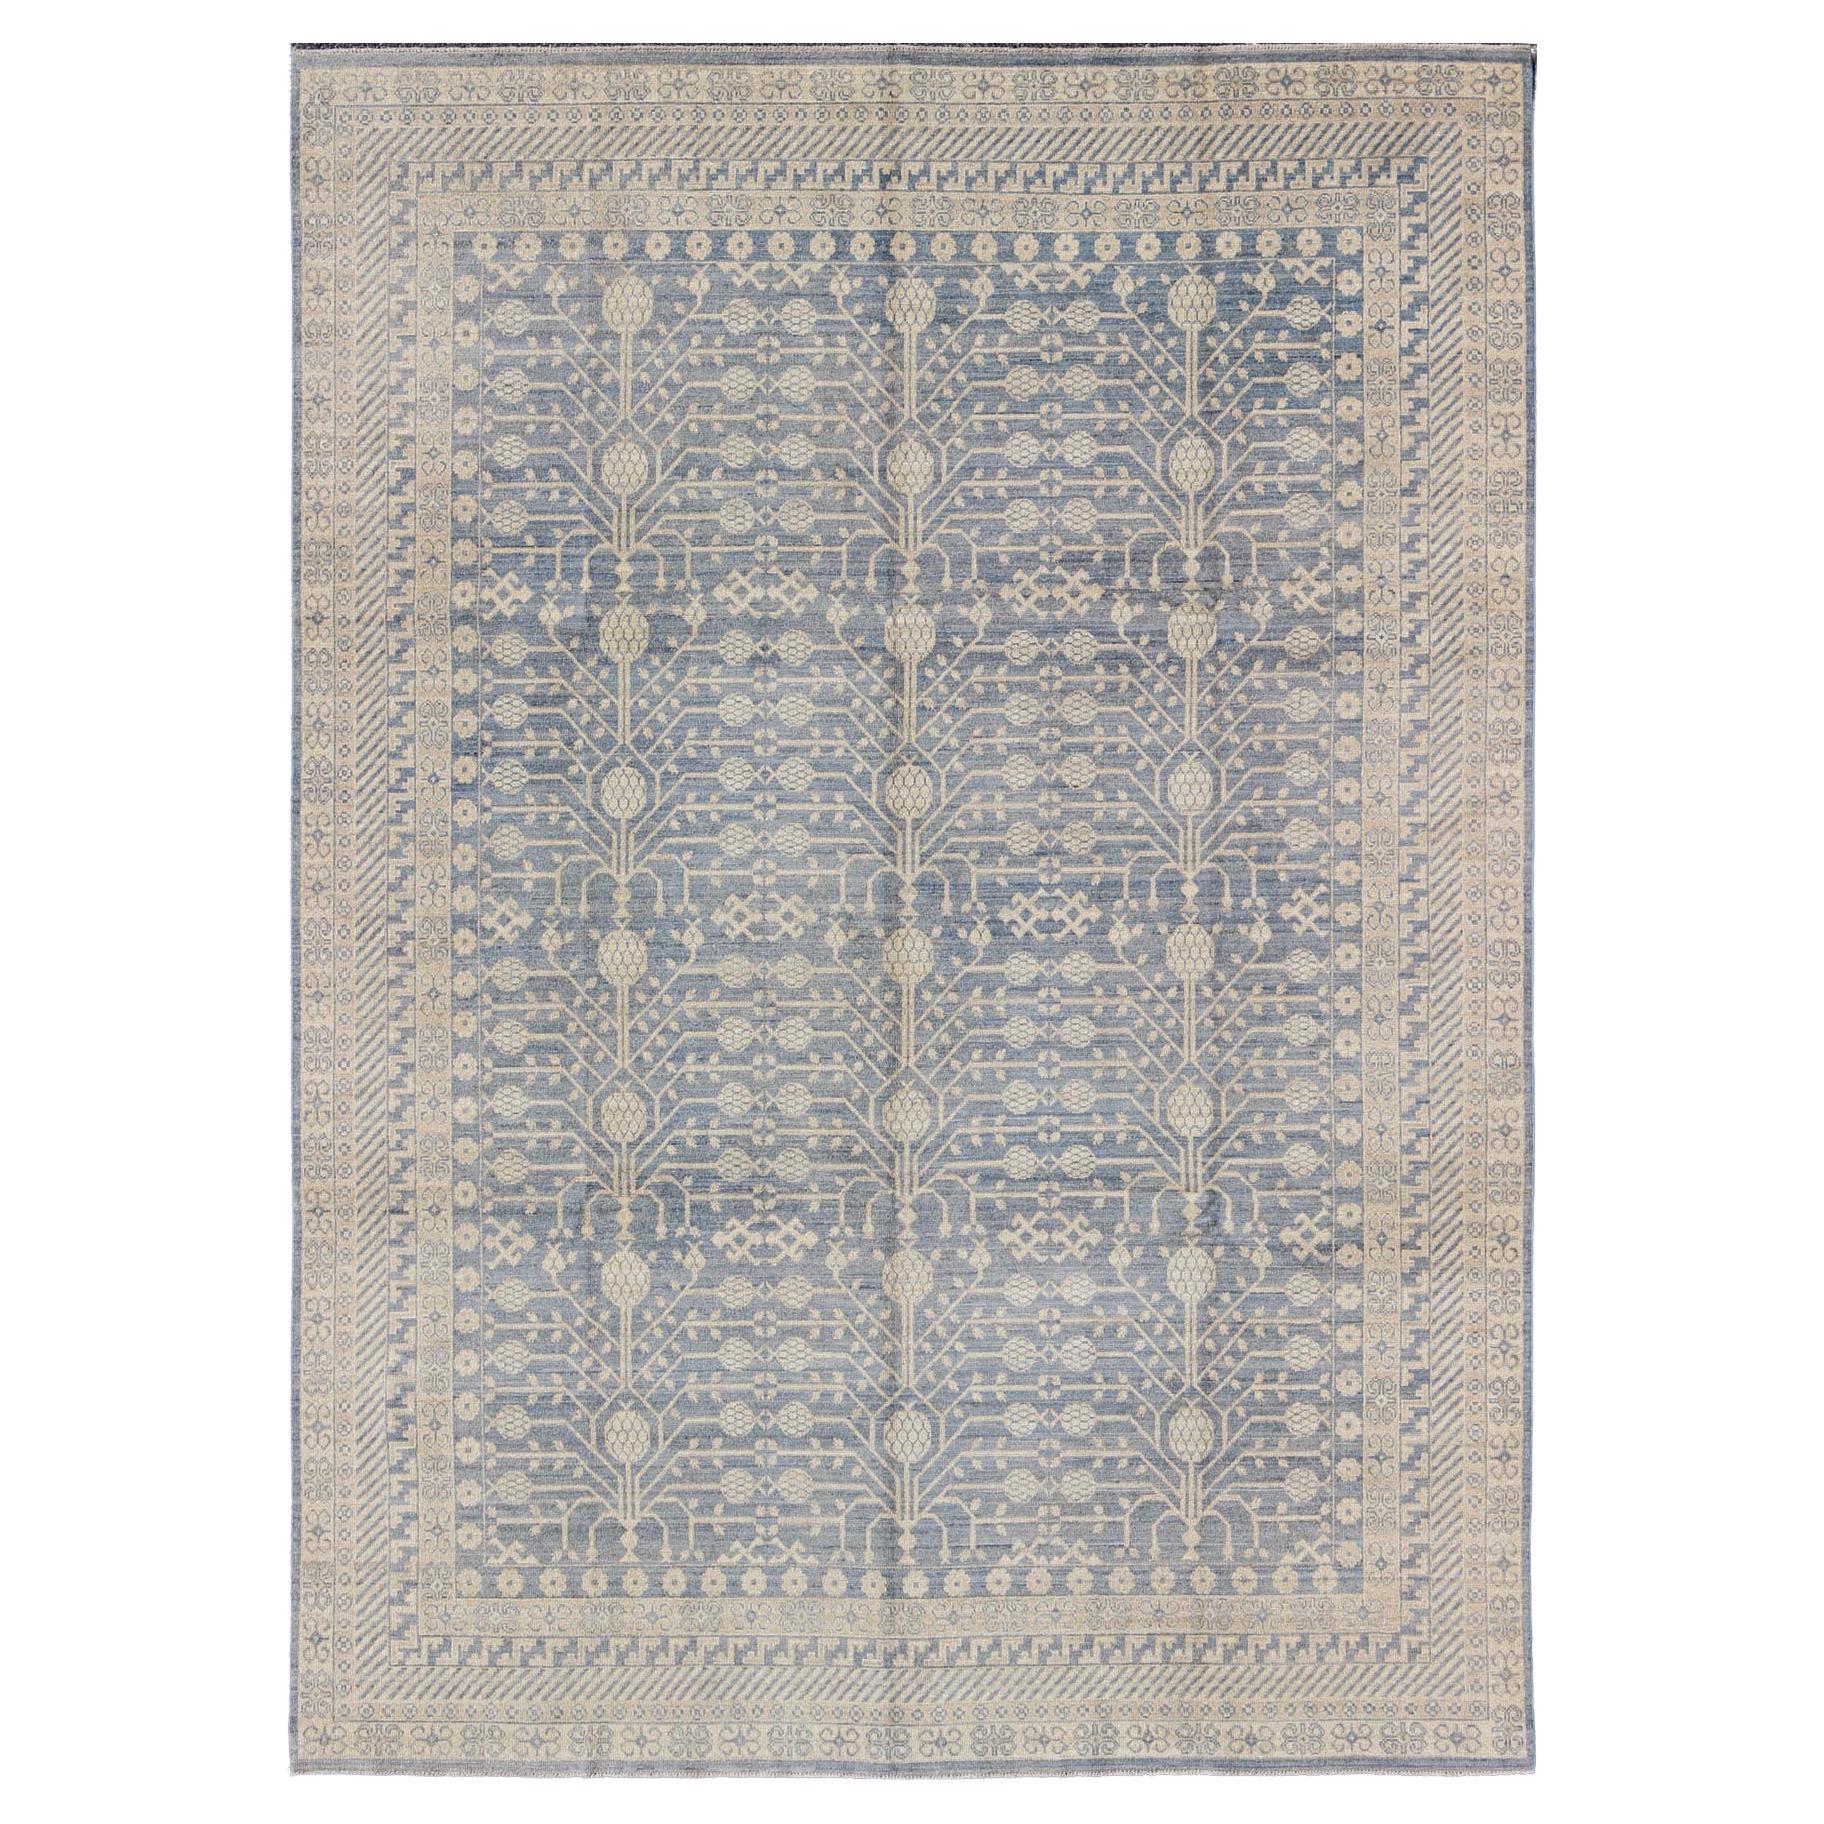 Khotan Design Rug with All-Over Pomegranate Pattern in Blue, Tan & Taupe For Sale